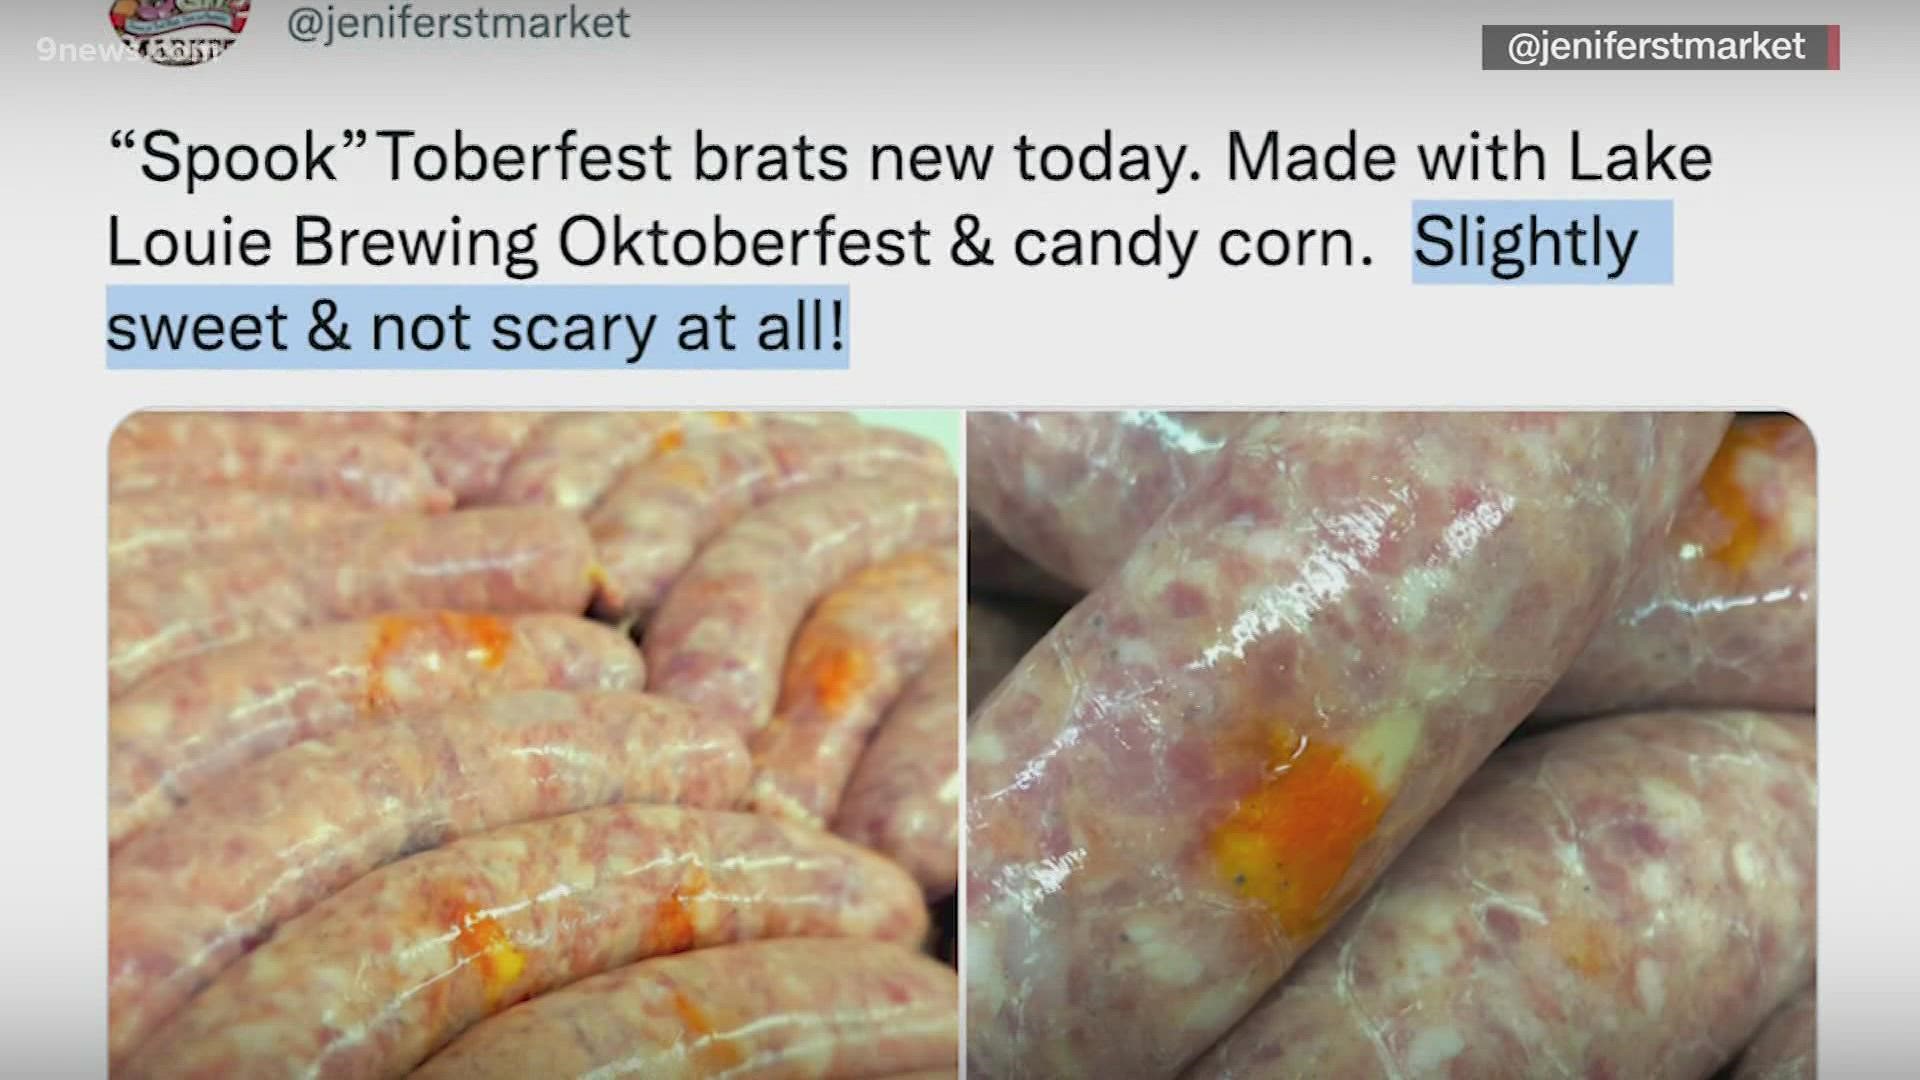 Slacker & Steve: A Madison, Wisconsin butcher gains a ton of attention this week for its "Spooktoberfest brats" that are made with meat, beer and candy corn.